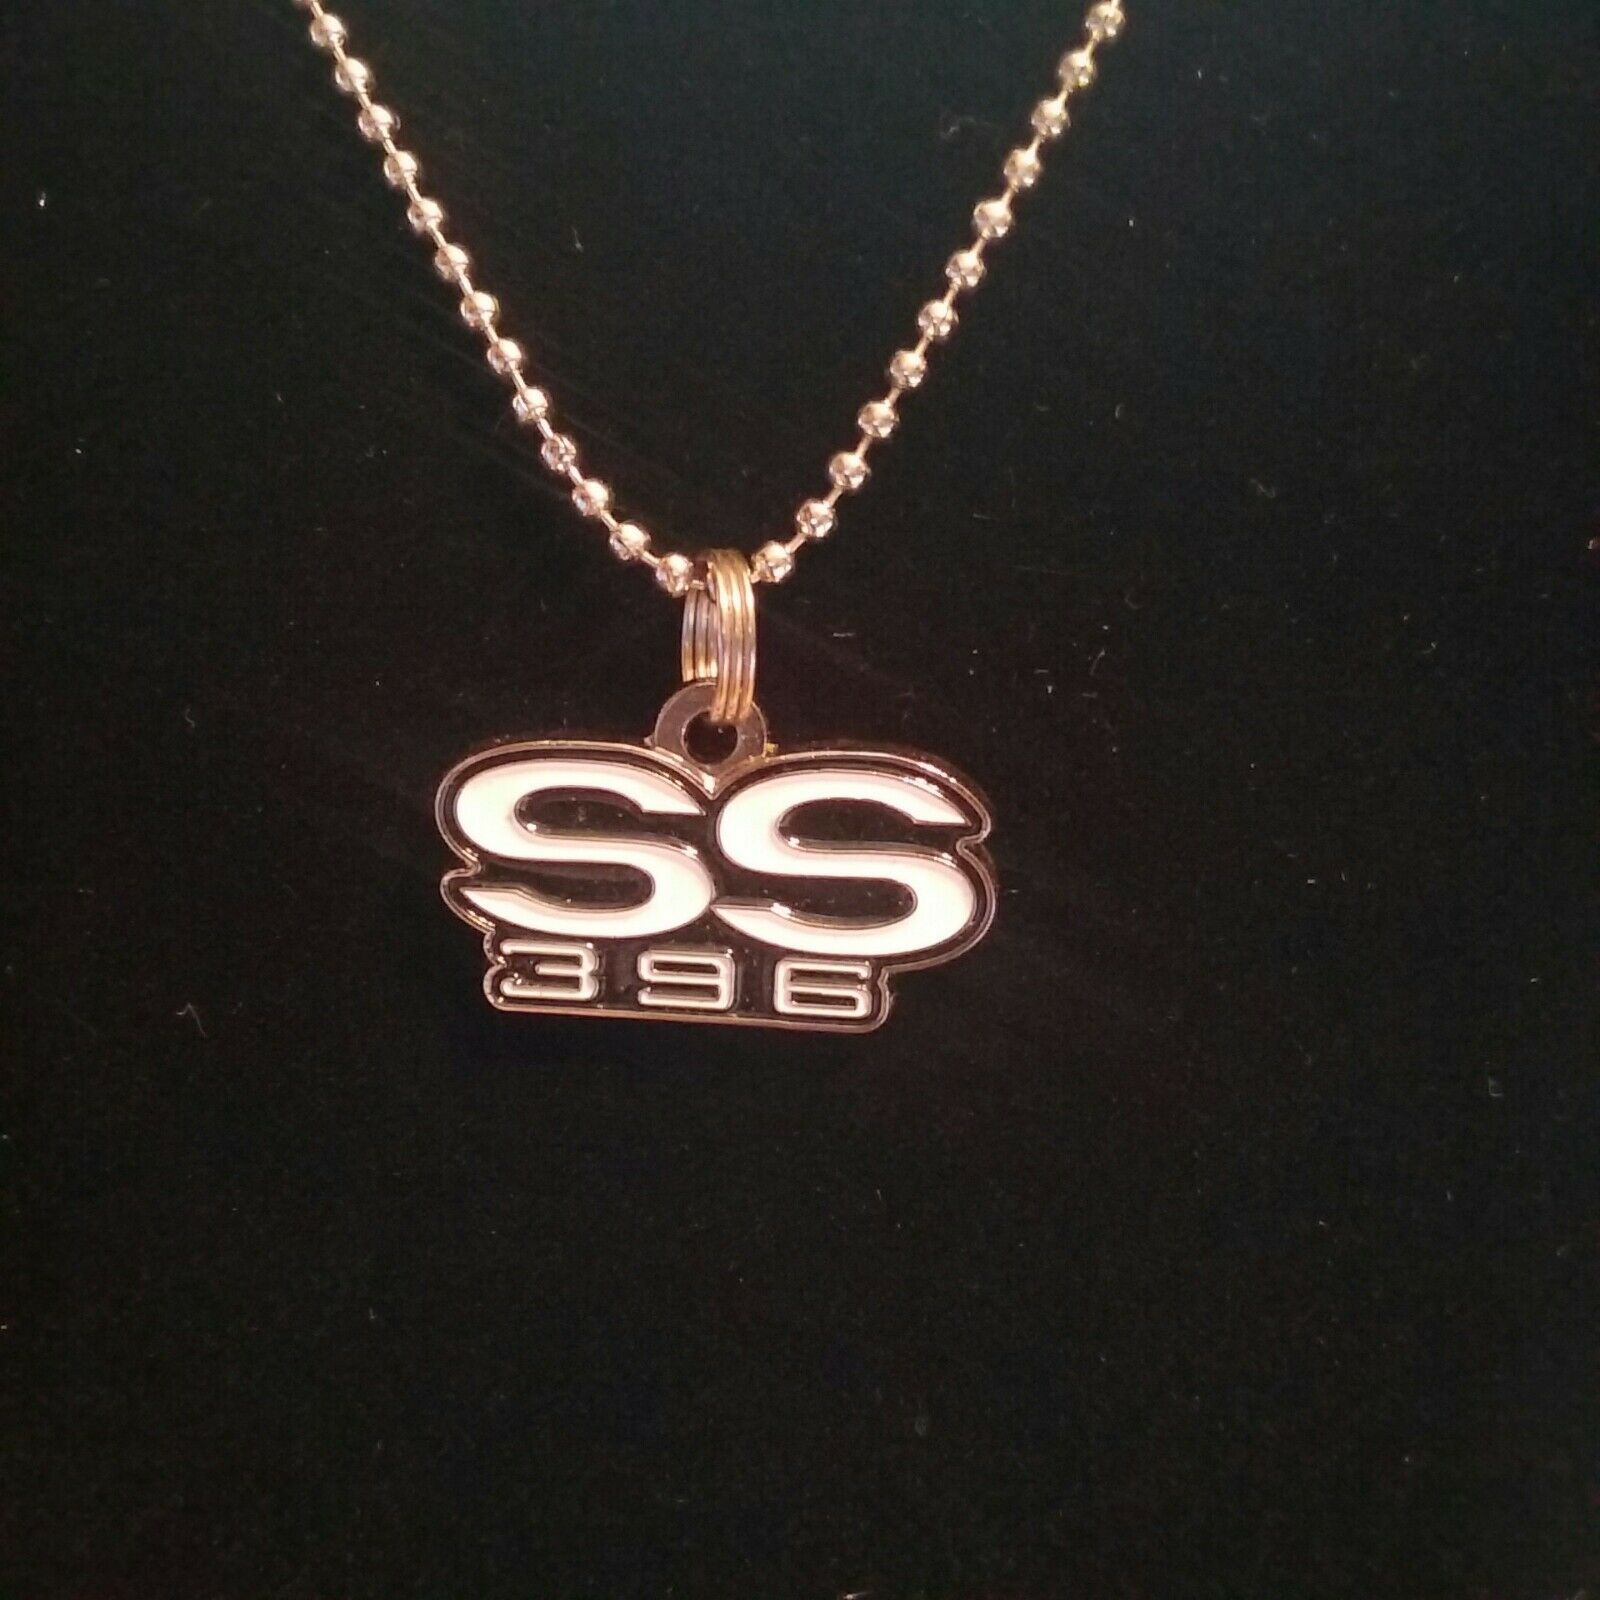 SS396,SS454,Rat D9 or Harley Motor Co $13.99ea. your choice SS Necklaces 